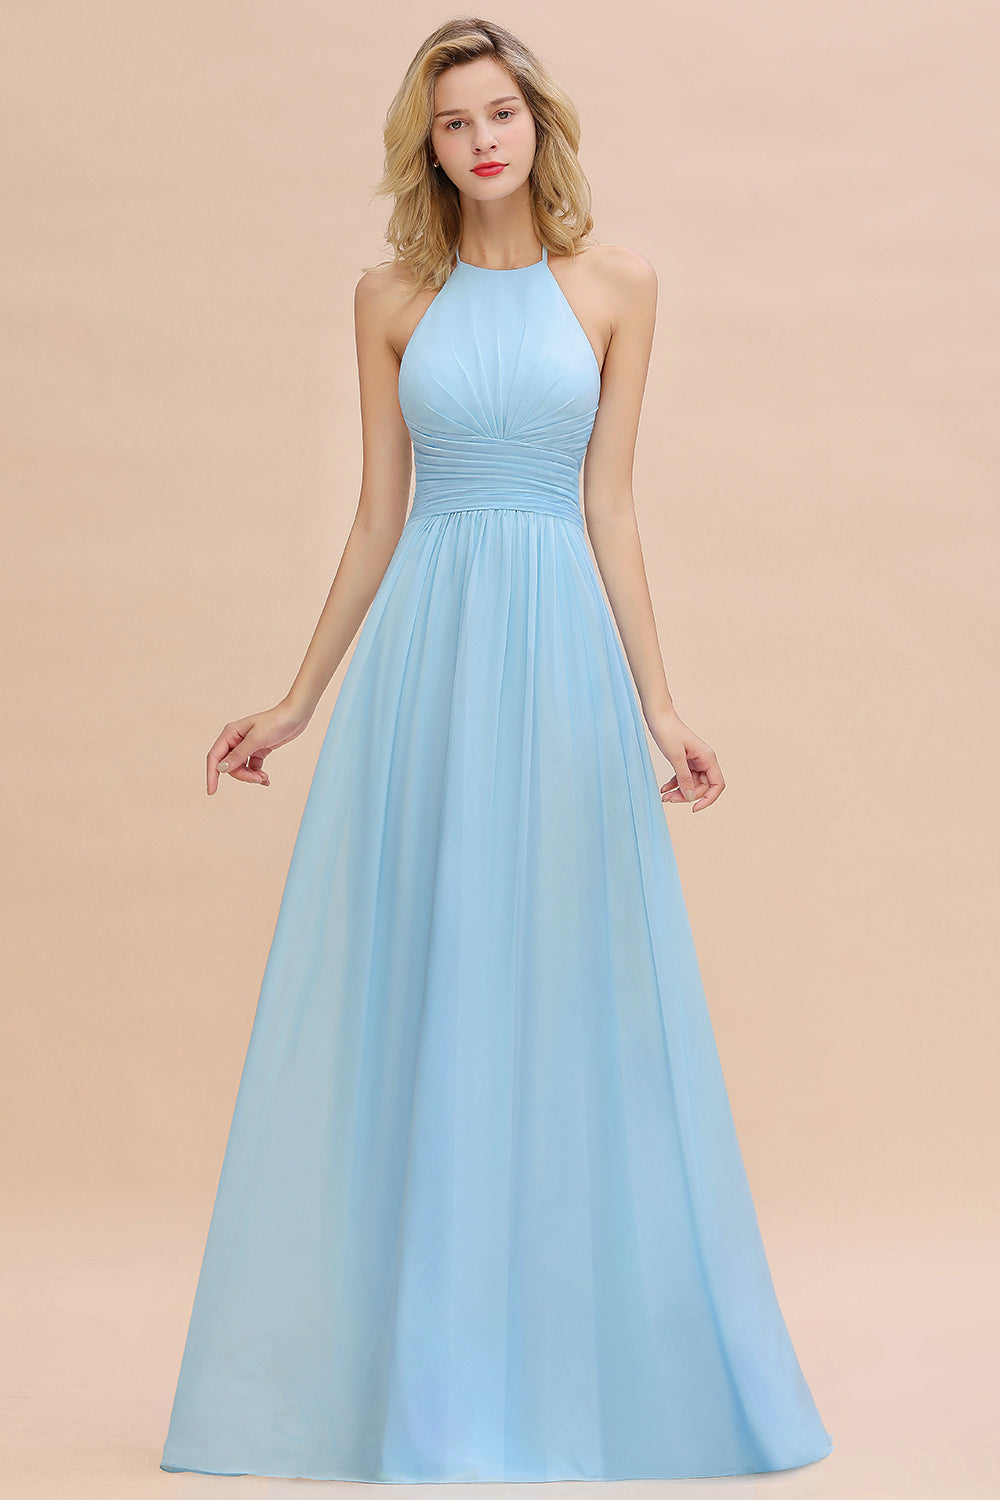 Load image into Gallery viewer, Glamorous Halter Backless Long Affordable Bridesmaid Dresses with Ruffle-27dress
